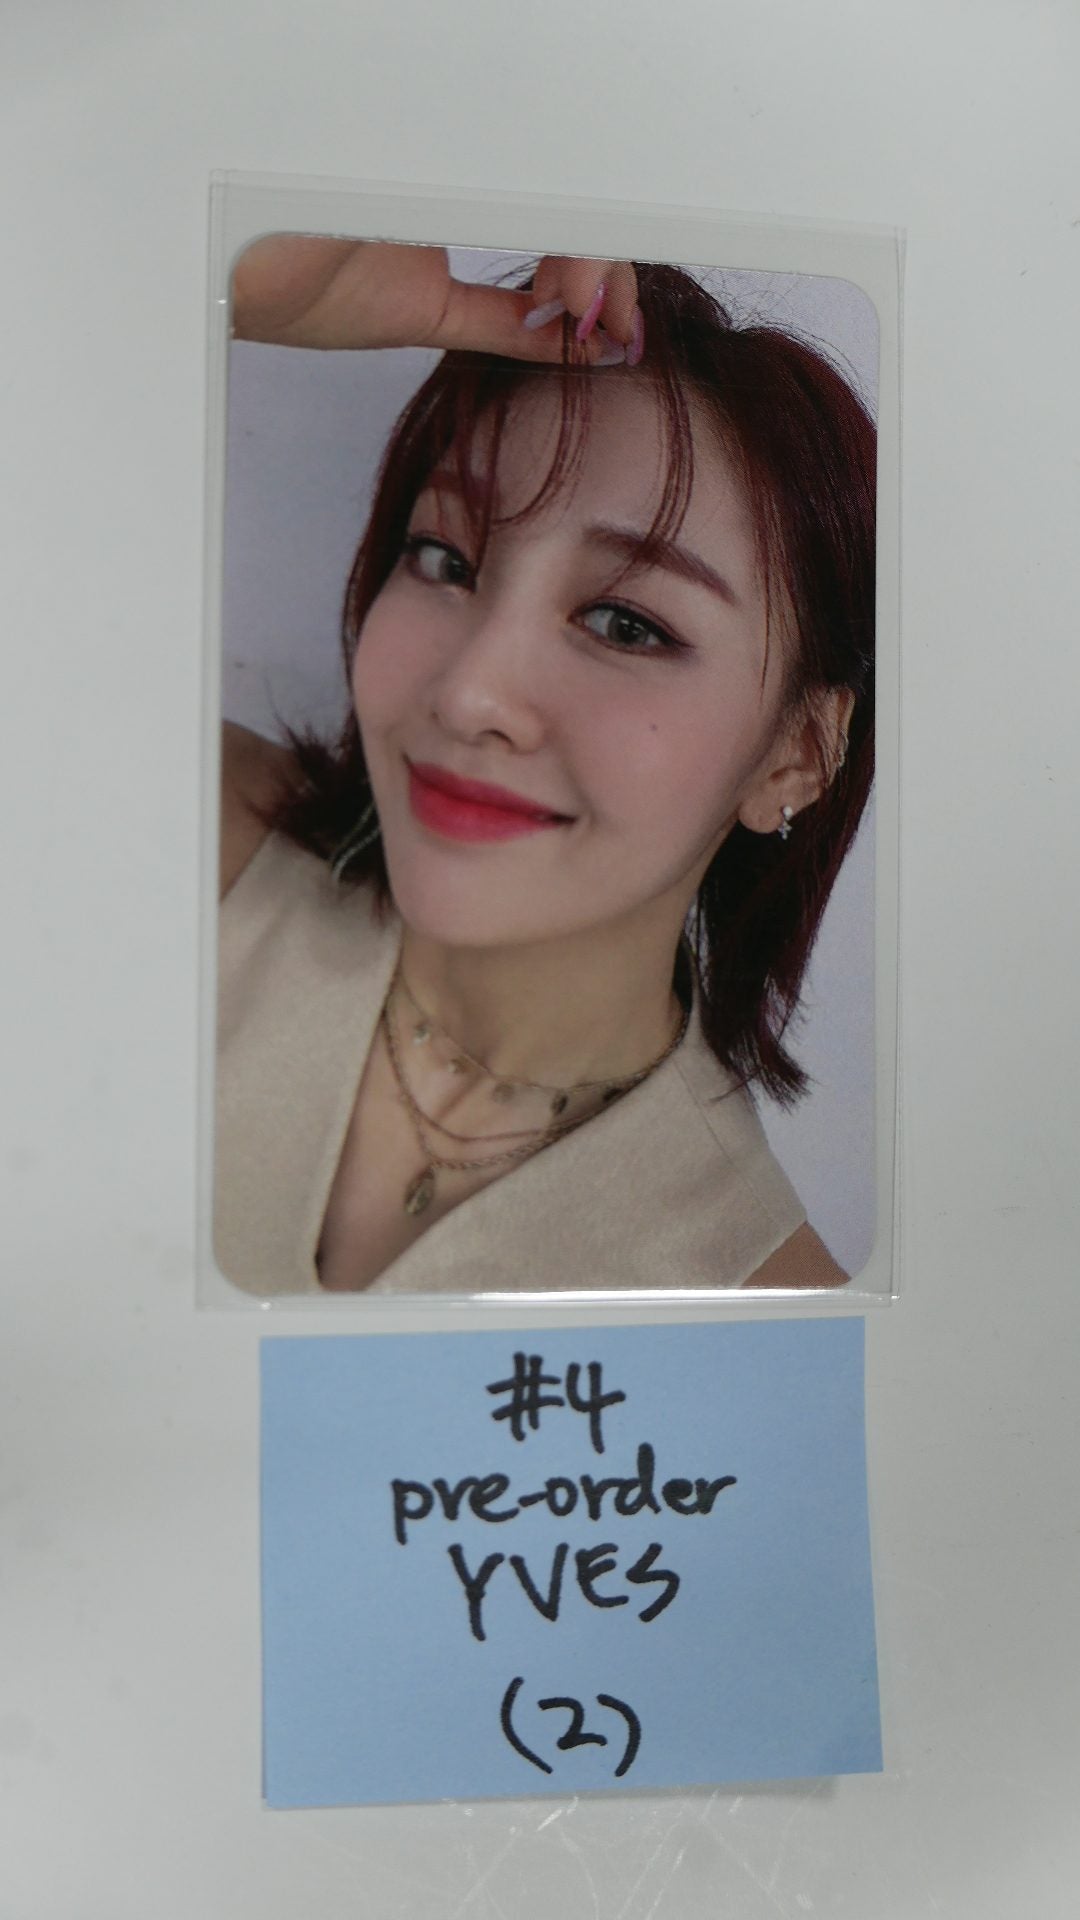 Loona 12:00 - Pre-order (MMT, WithD, Etc) benefit photocard - Yves